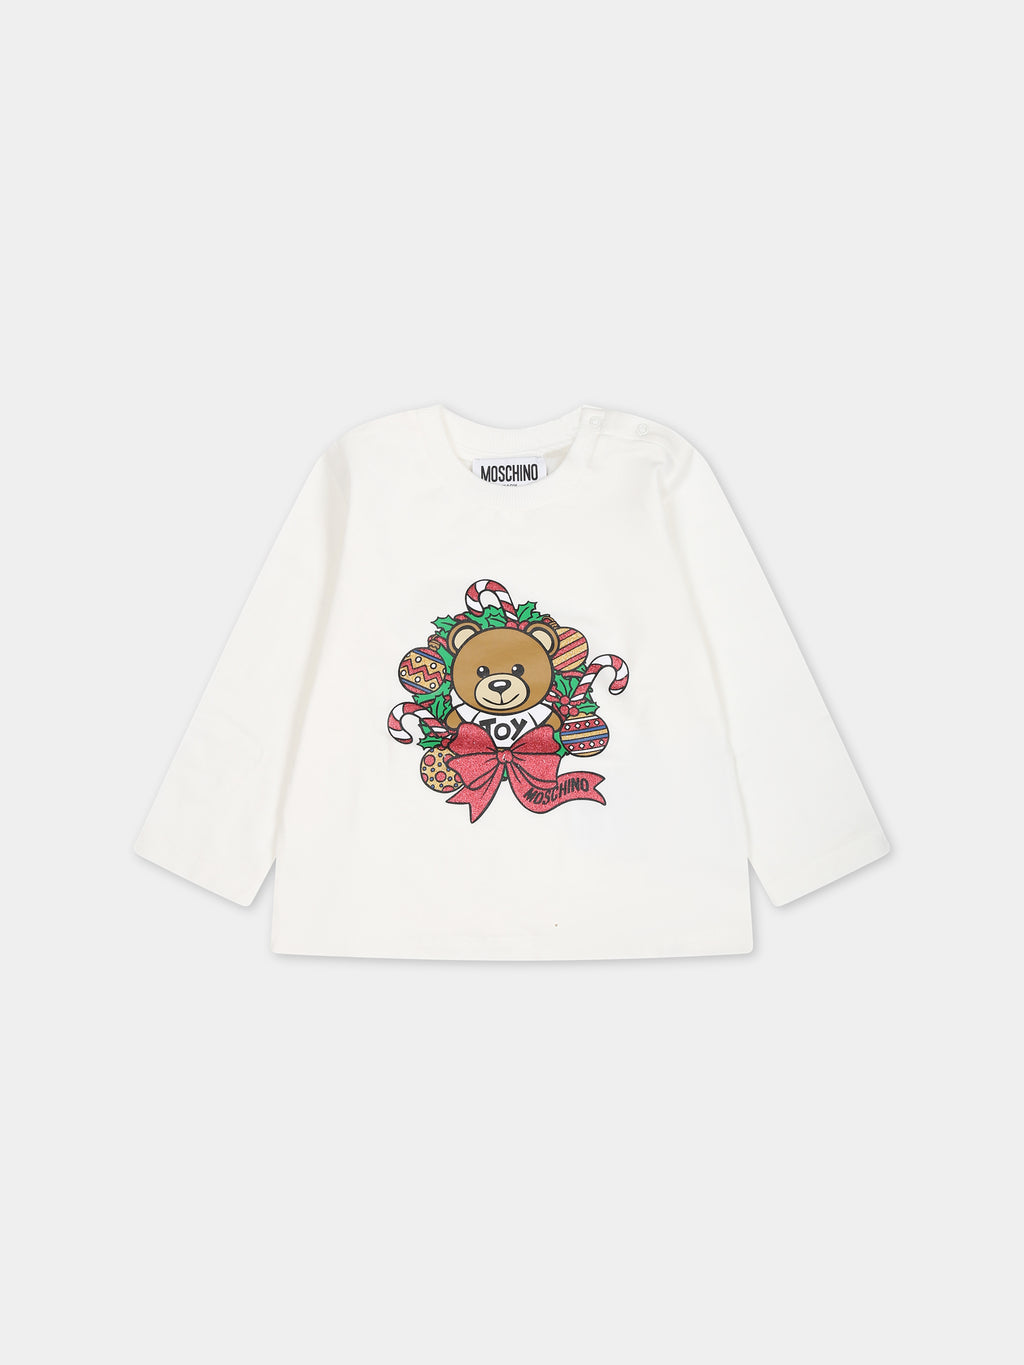 White t-shirt for baby kids with Teddy bear and logo